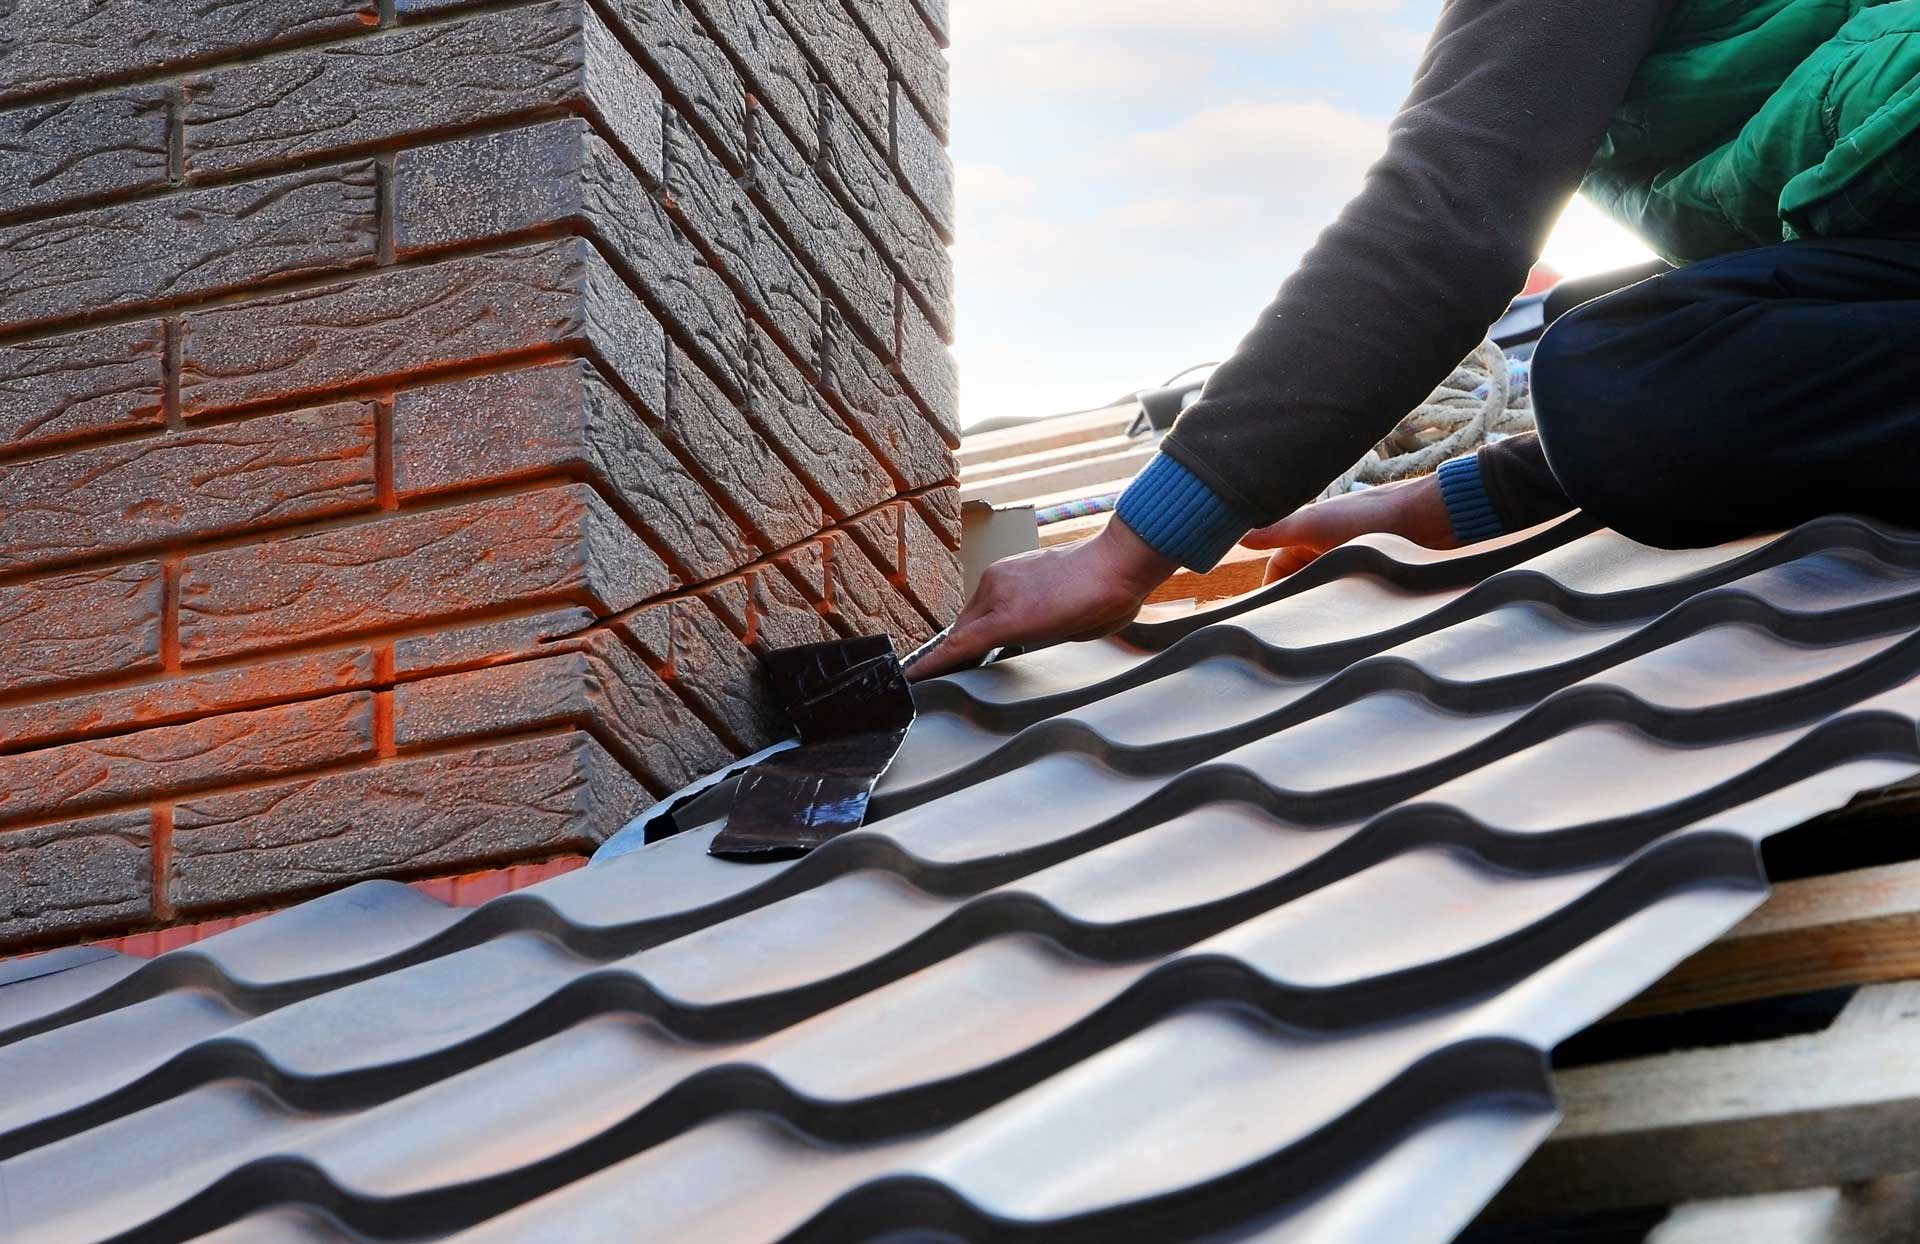 What You Need to Know About Residential Tile Roofing